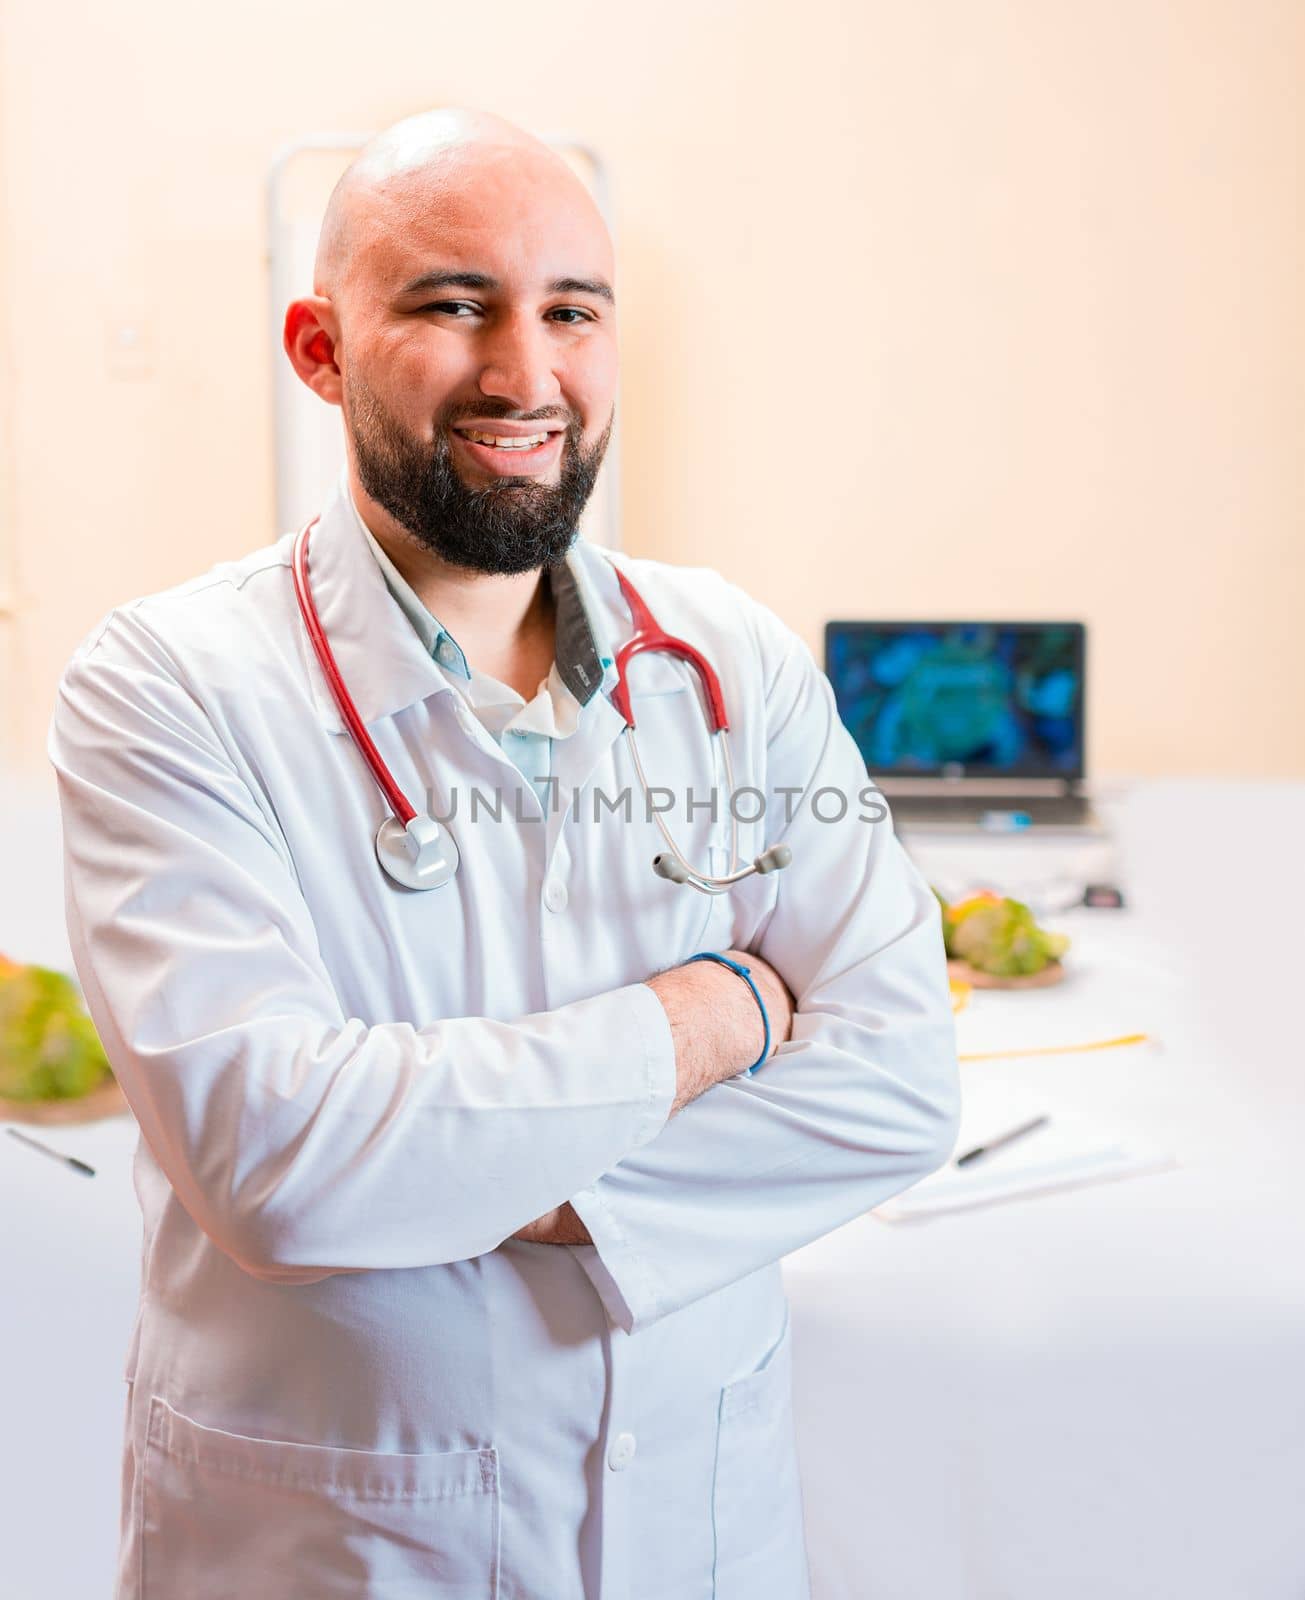 Smiling nutritionist doctor with crossed arms in her office. Portrait of smiling professional nutritionist, Portrait of smiling male nutritionist at his workplace